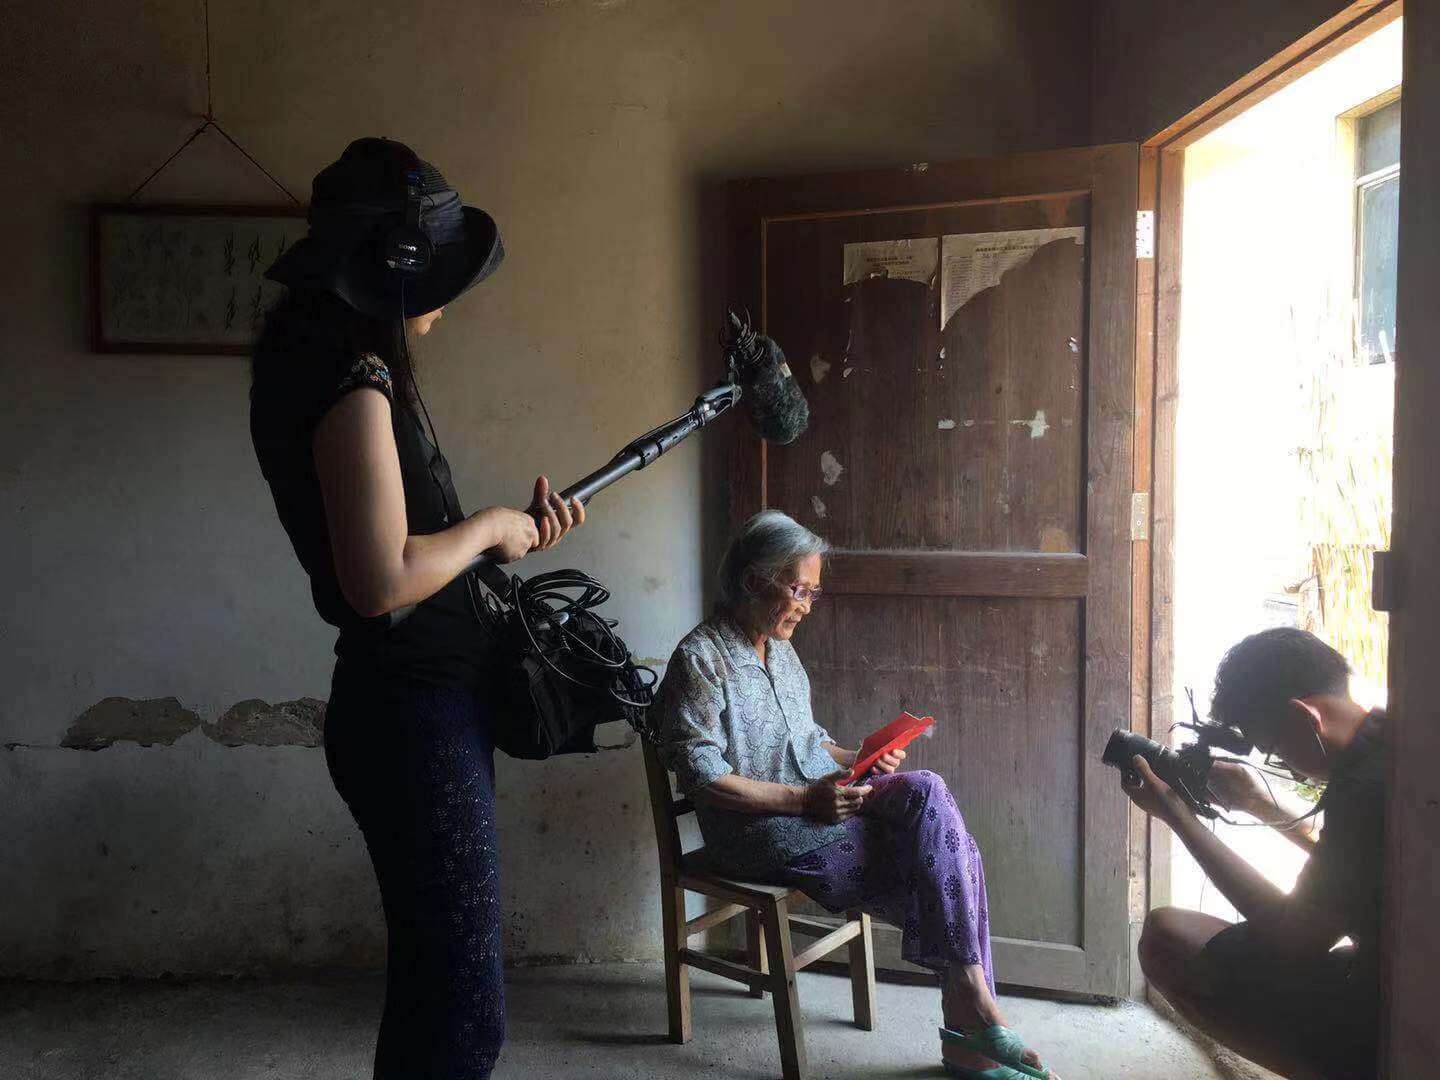 Production still from Hidden Letters. An elderly woman is sitting on a chair, looking at a piece of red paper that she holds in her hand. She is illuminated by light coming in through the doorway. To her left, a woman is holding a boom mic, and to her front, a man is crouched with a camera pointed in her direction.